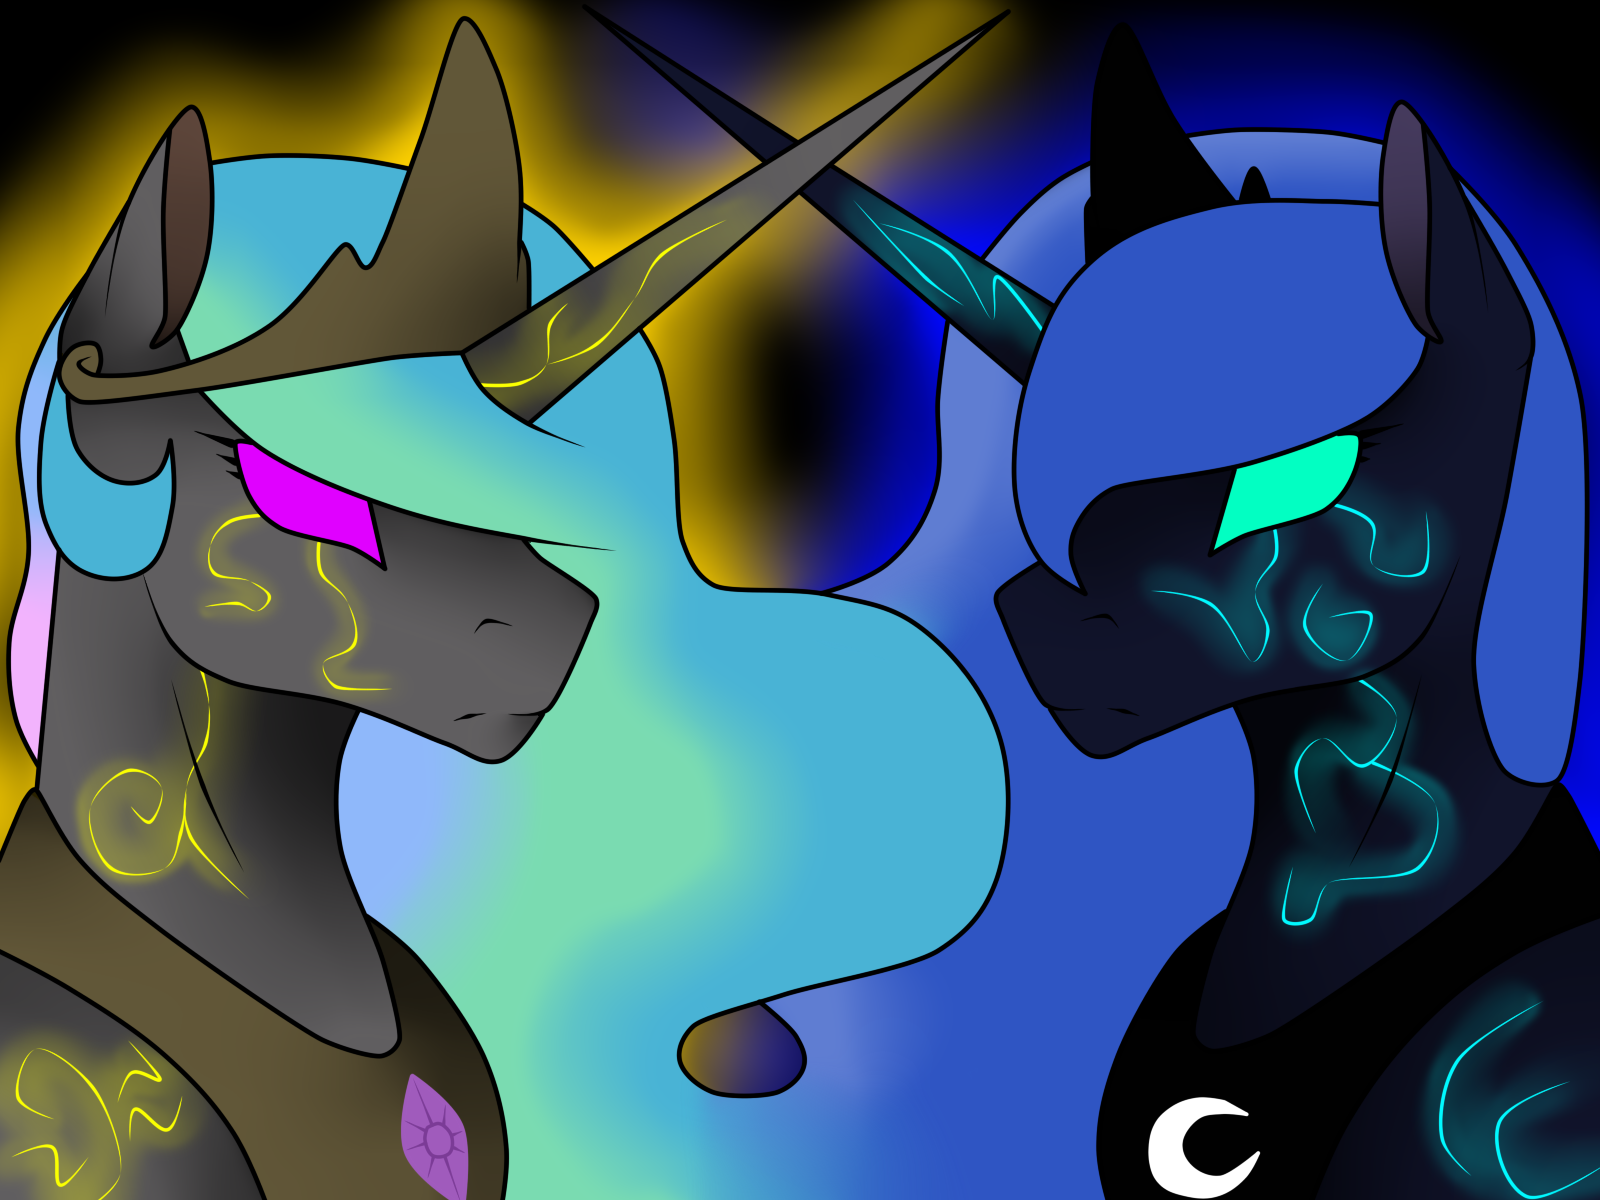 royal_sisters_by_blue_arctic-dacah34.png